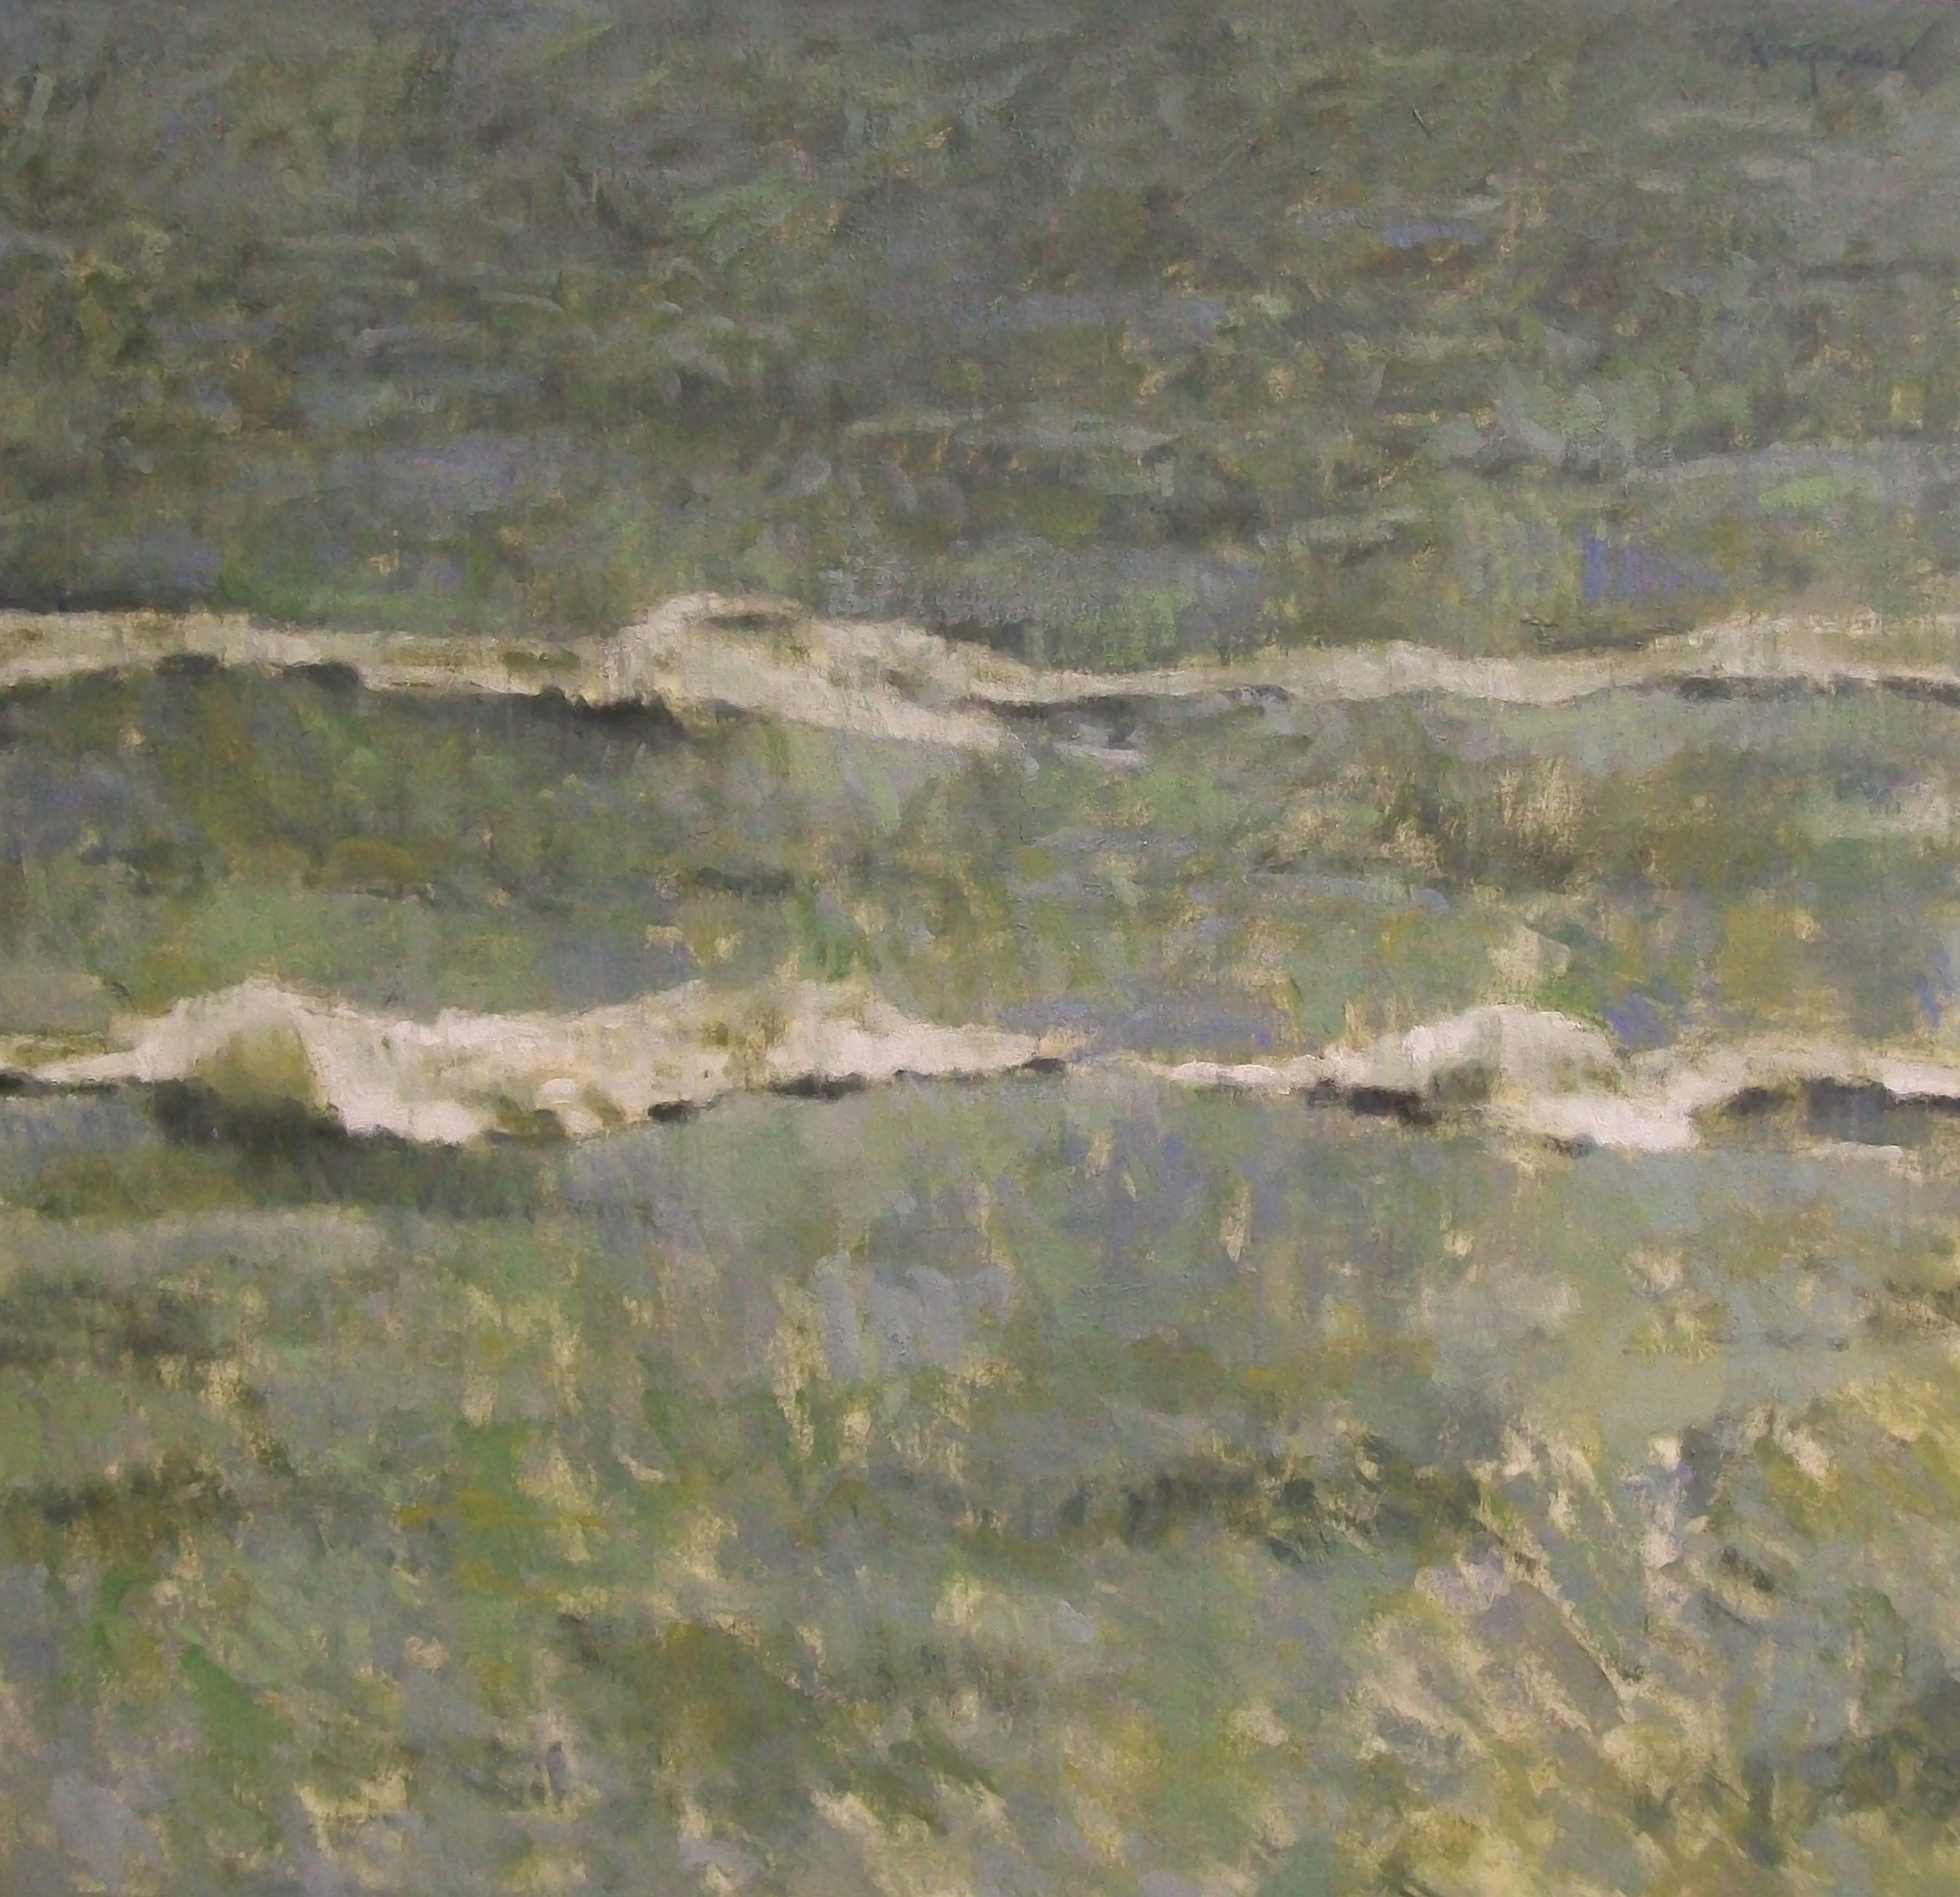 Cresting Waves, 2002, oil on canvas